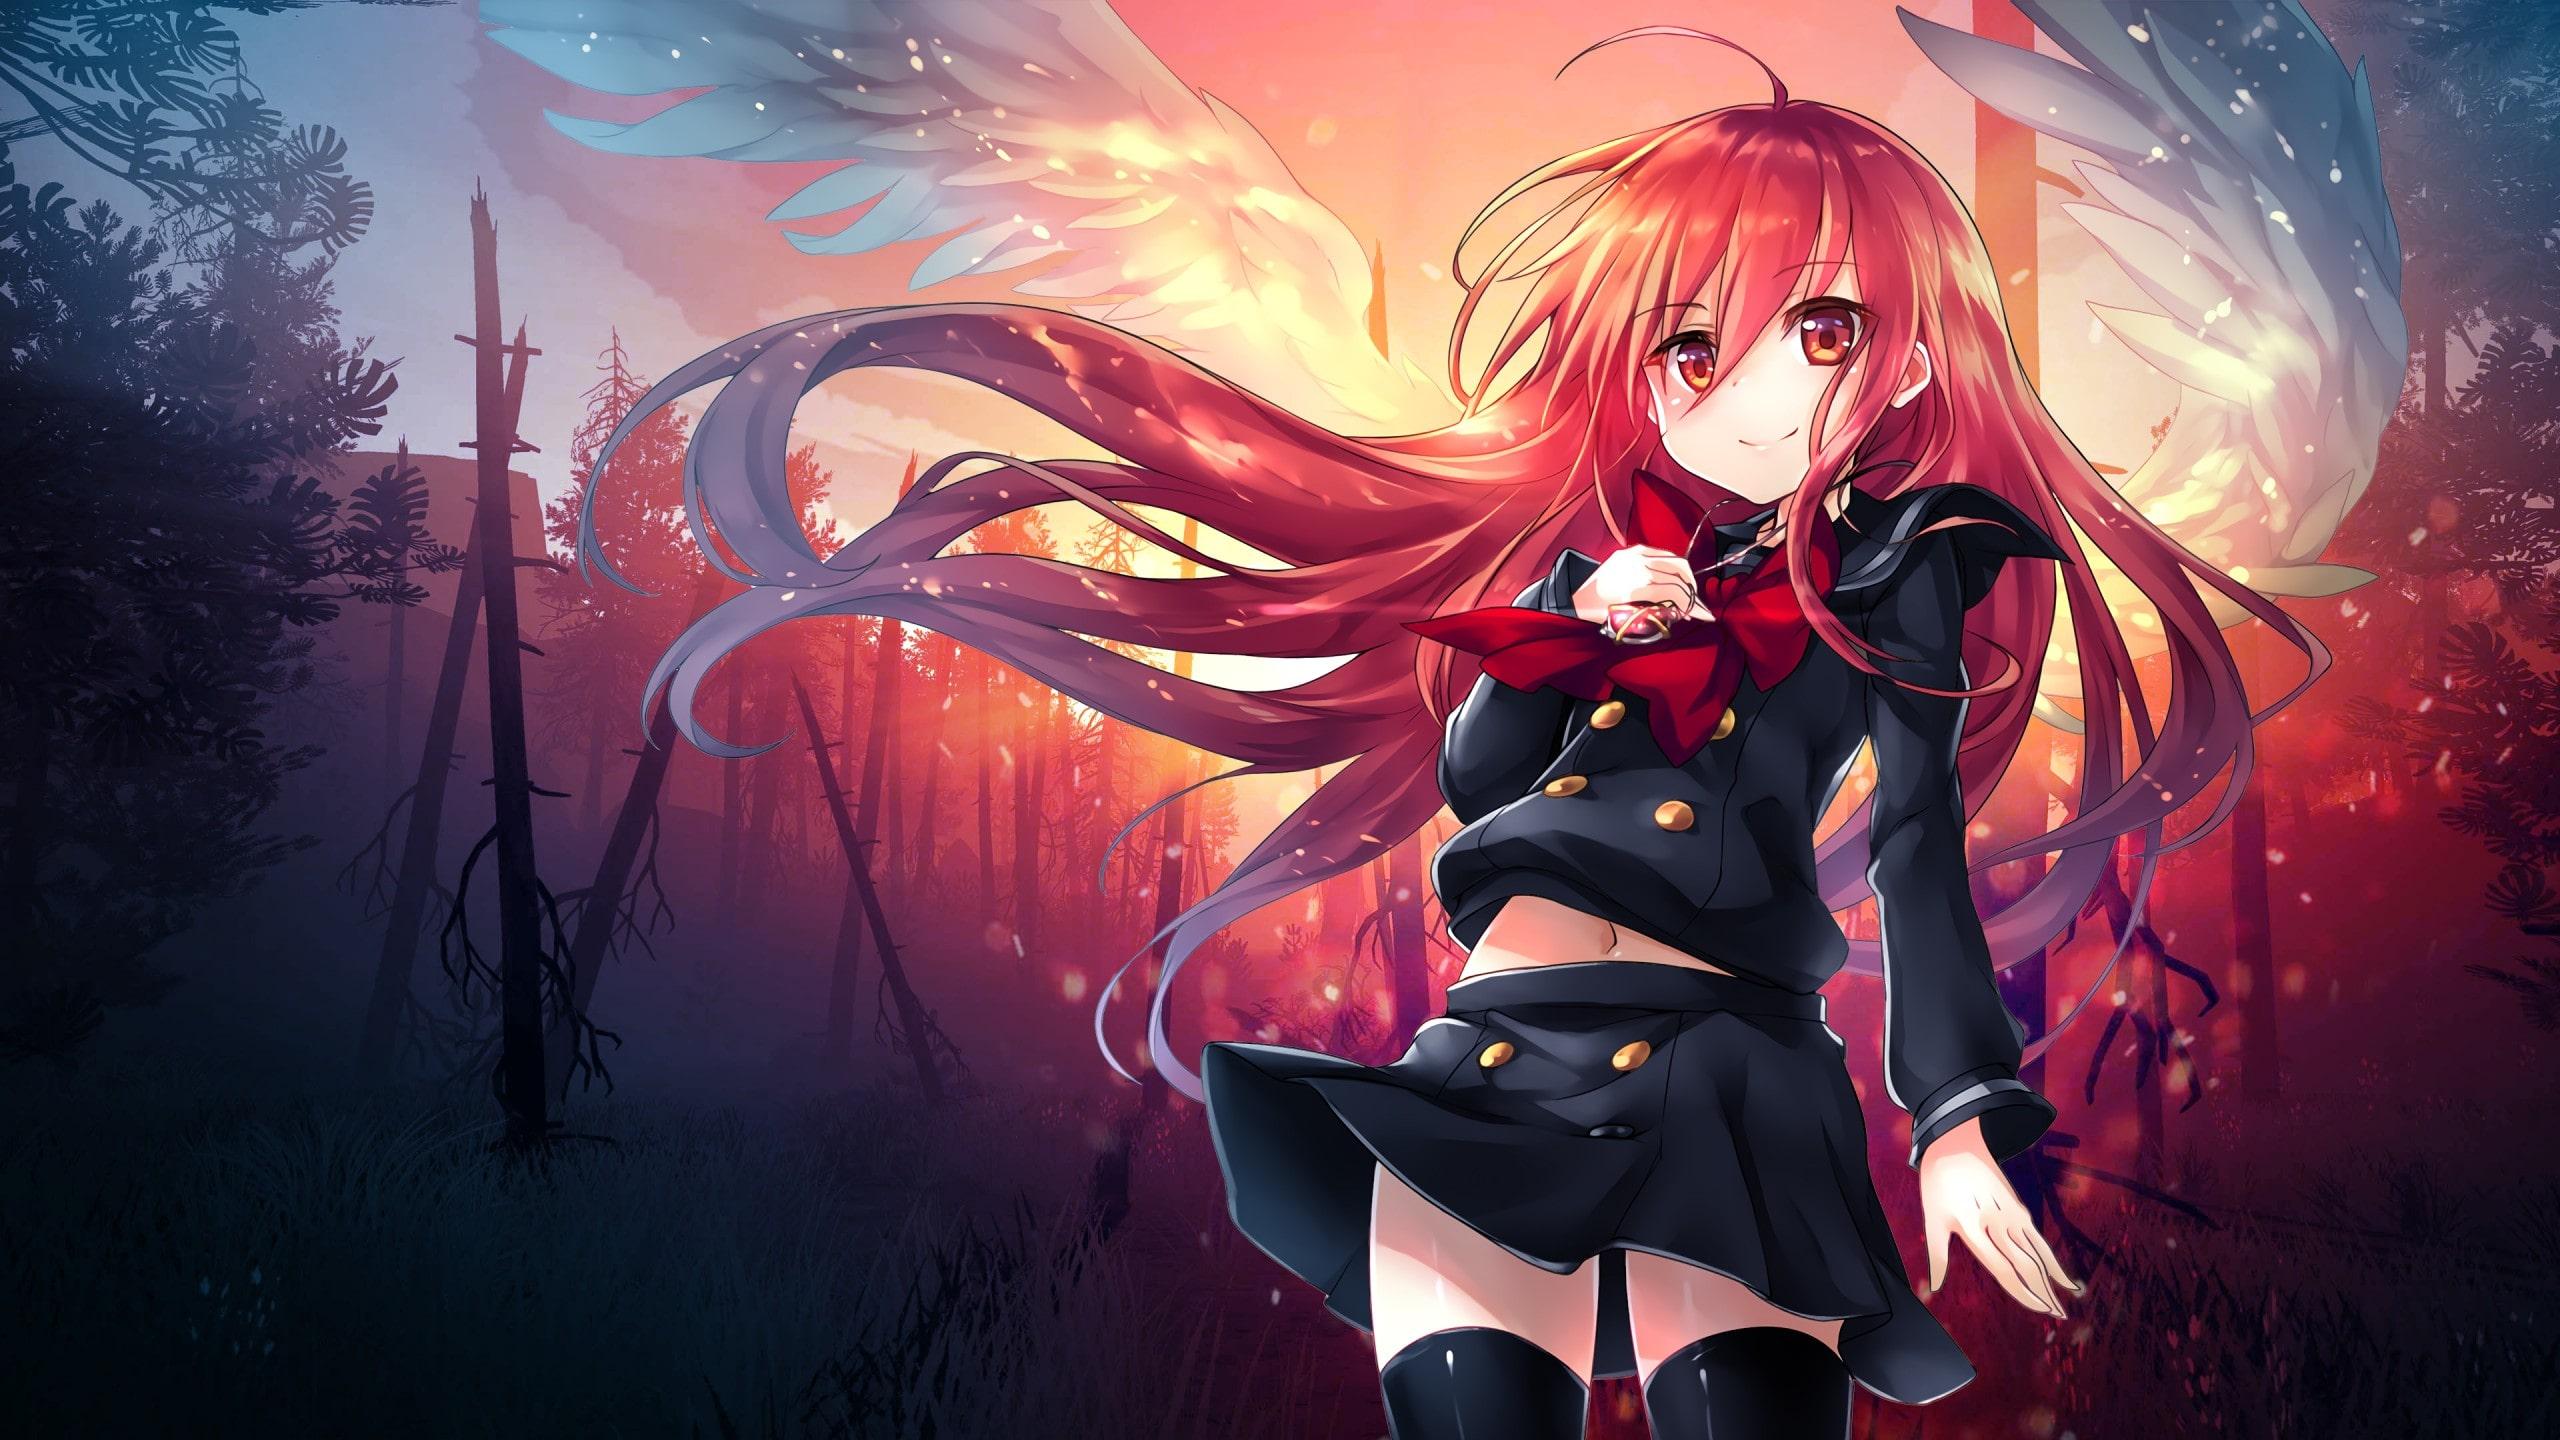 Anime Girl Wallpapers HD Free download 